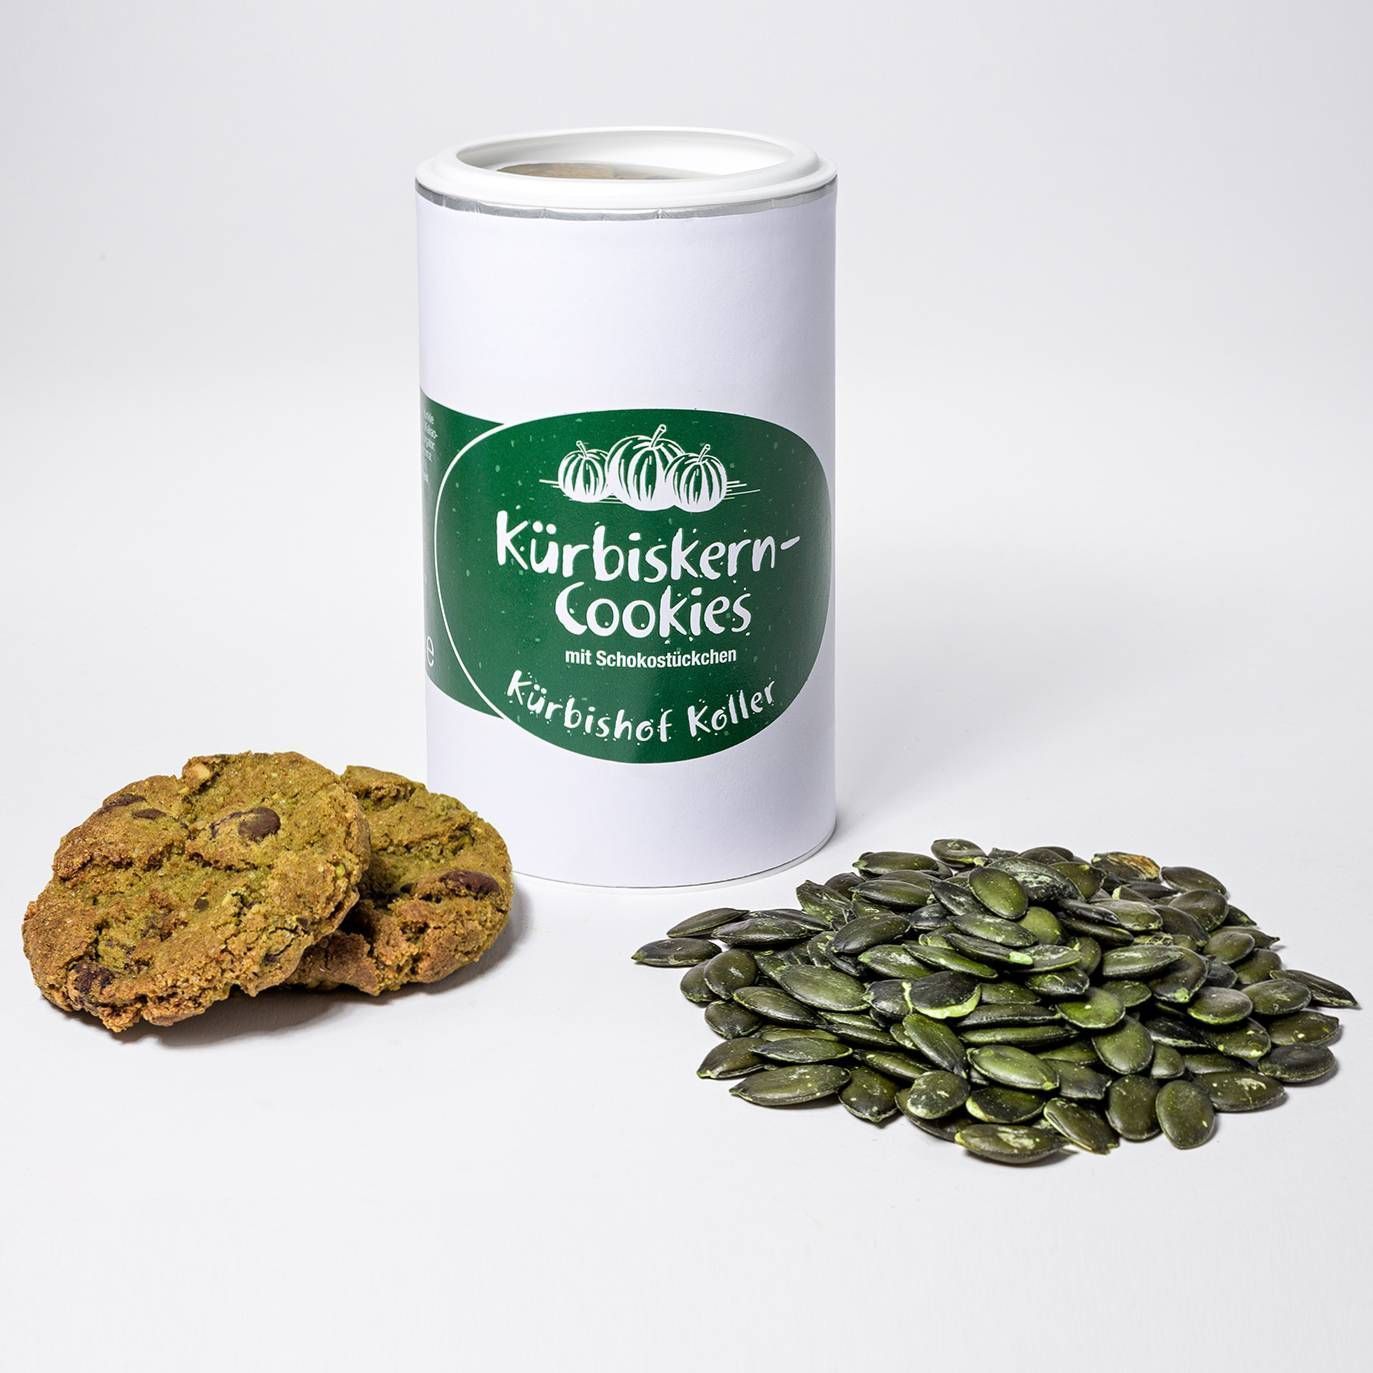 Pumpkin Seed Cookies with Chocolate Chips in South Africa